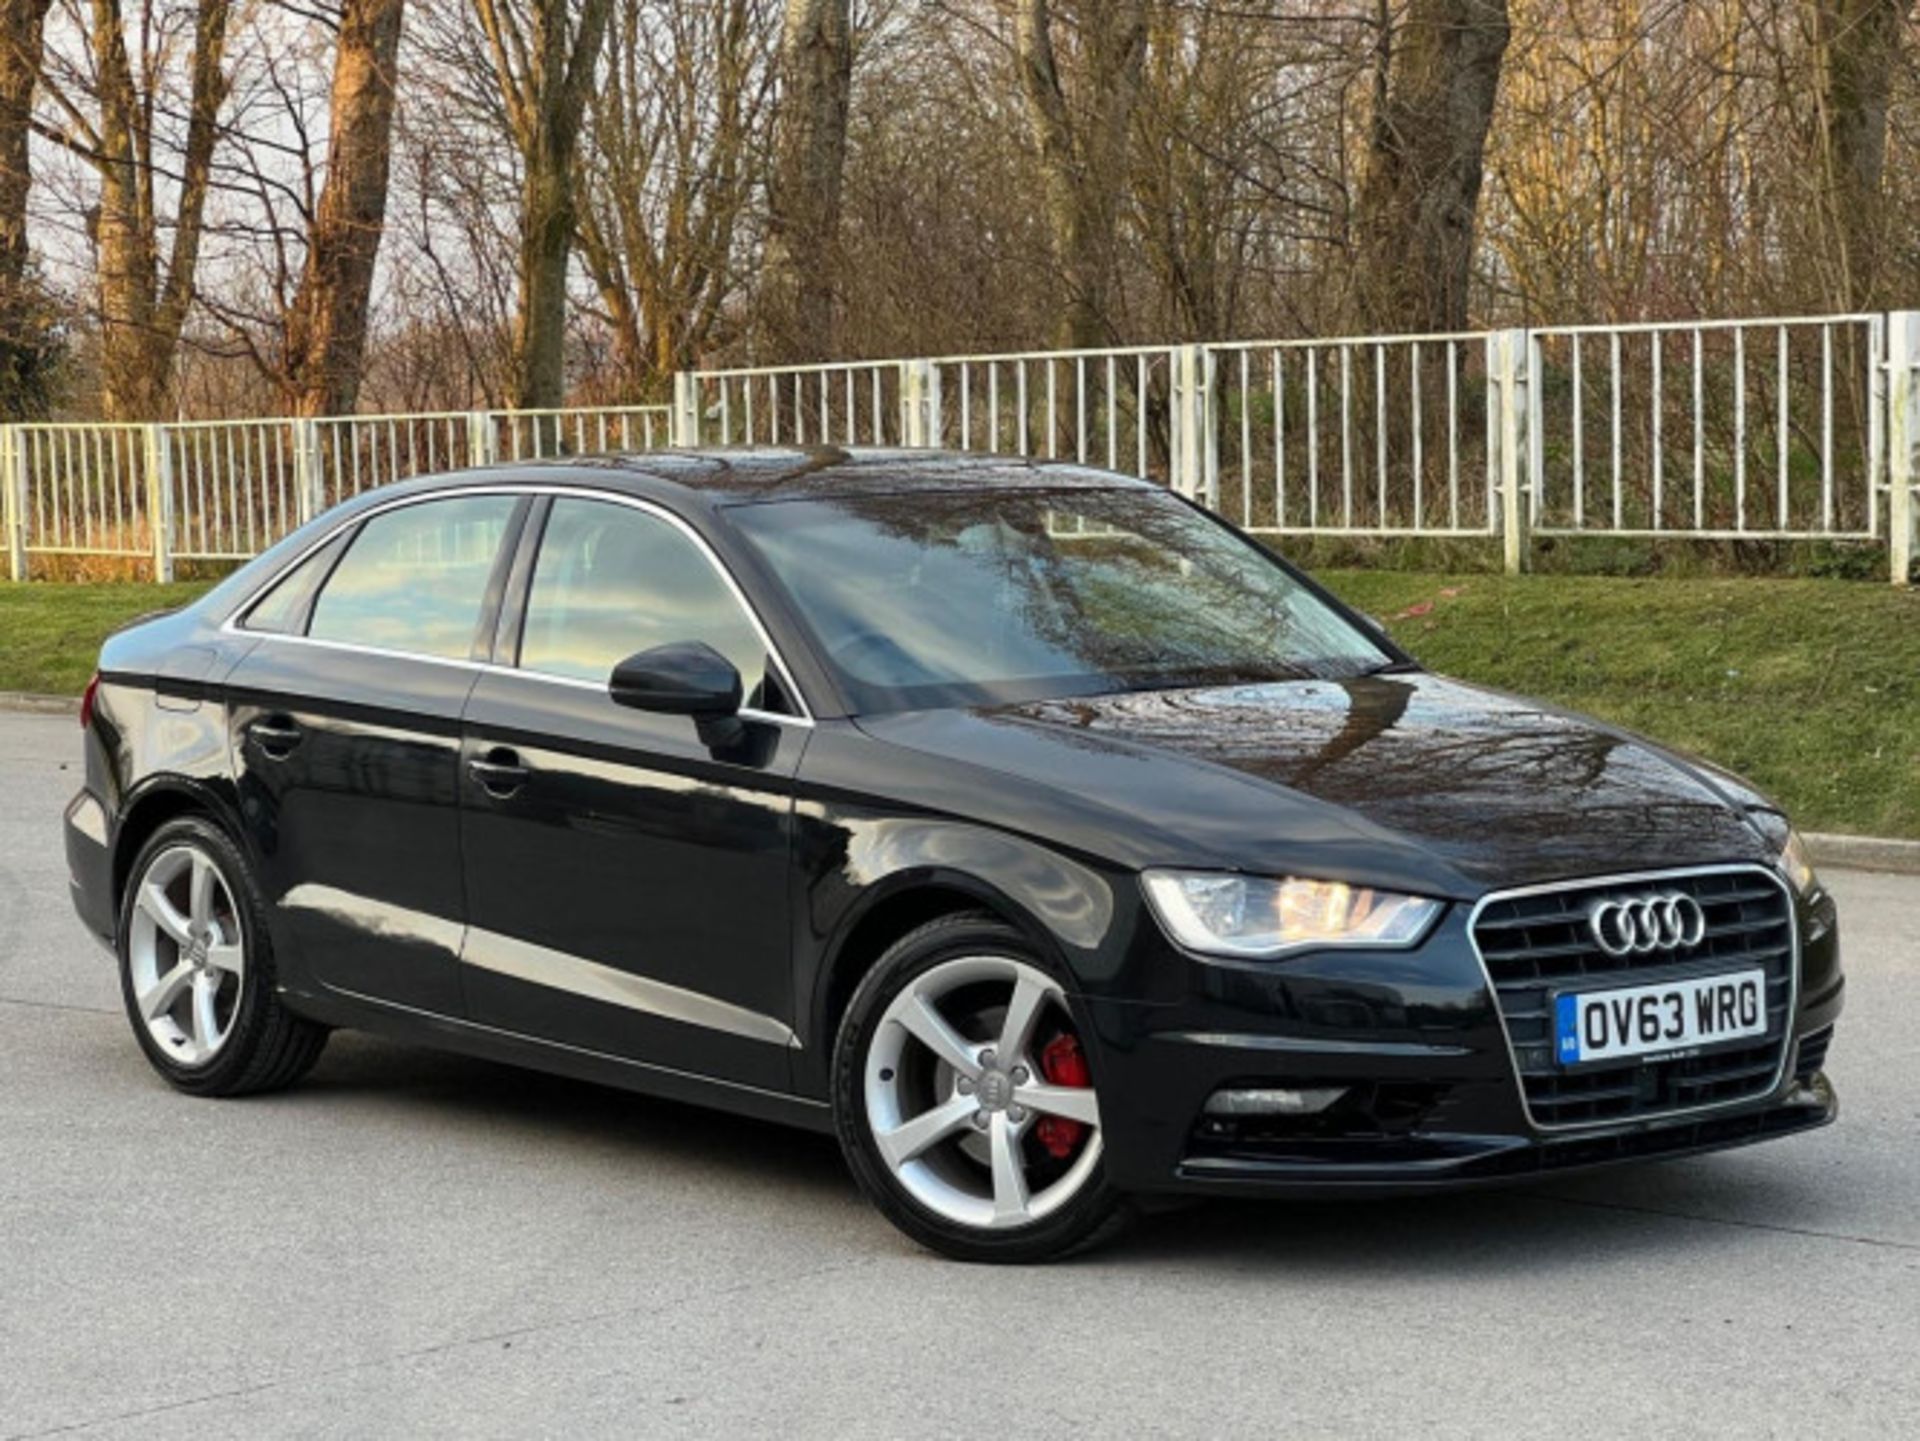 AUDI A3 2.0TDI SPORTBACK - STYLE, PERFORMANCE, AND COMFORT COMBINED >>--NO VAT ON HAMMER--<< - Image 212 of 216